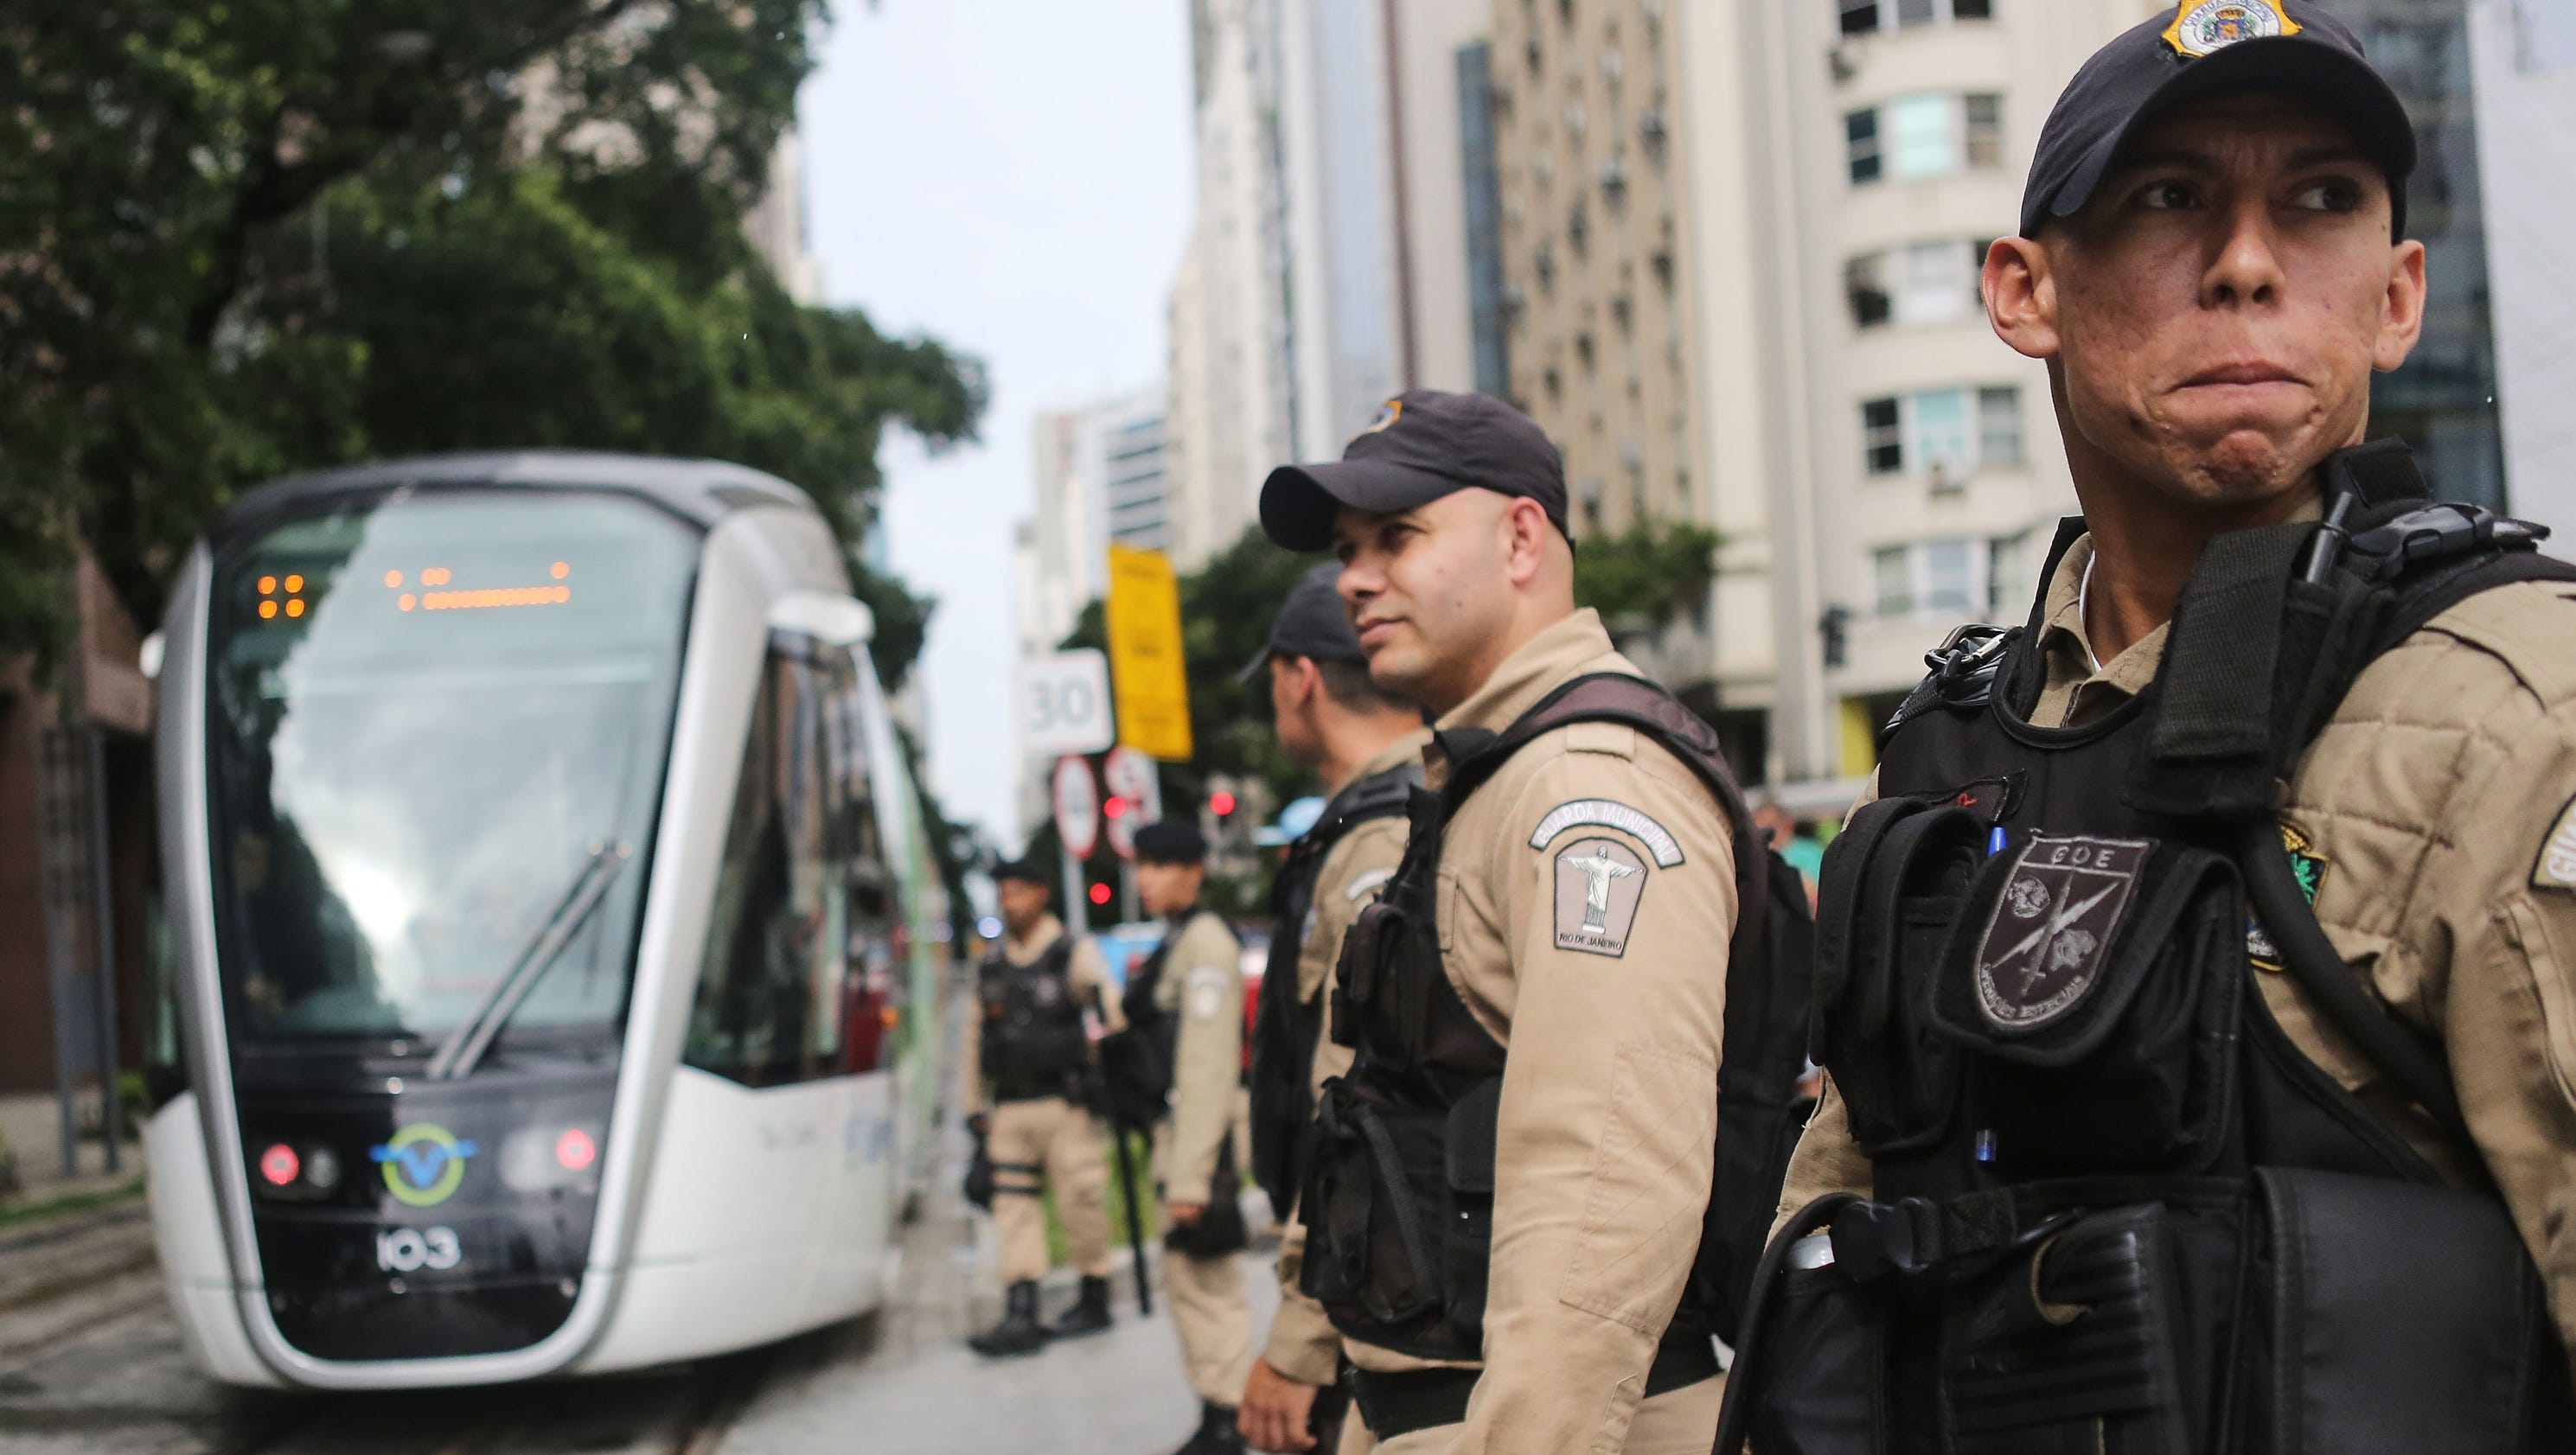 Rio violence leaves little confidence in public security3200 x 1680